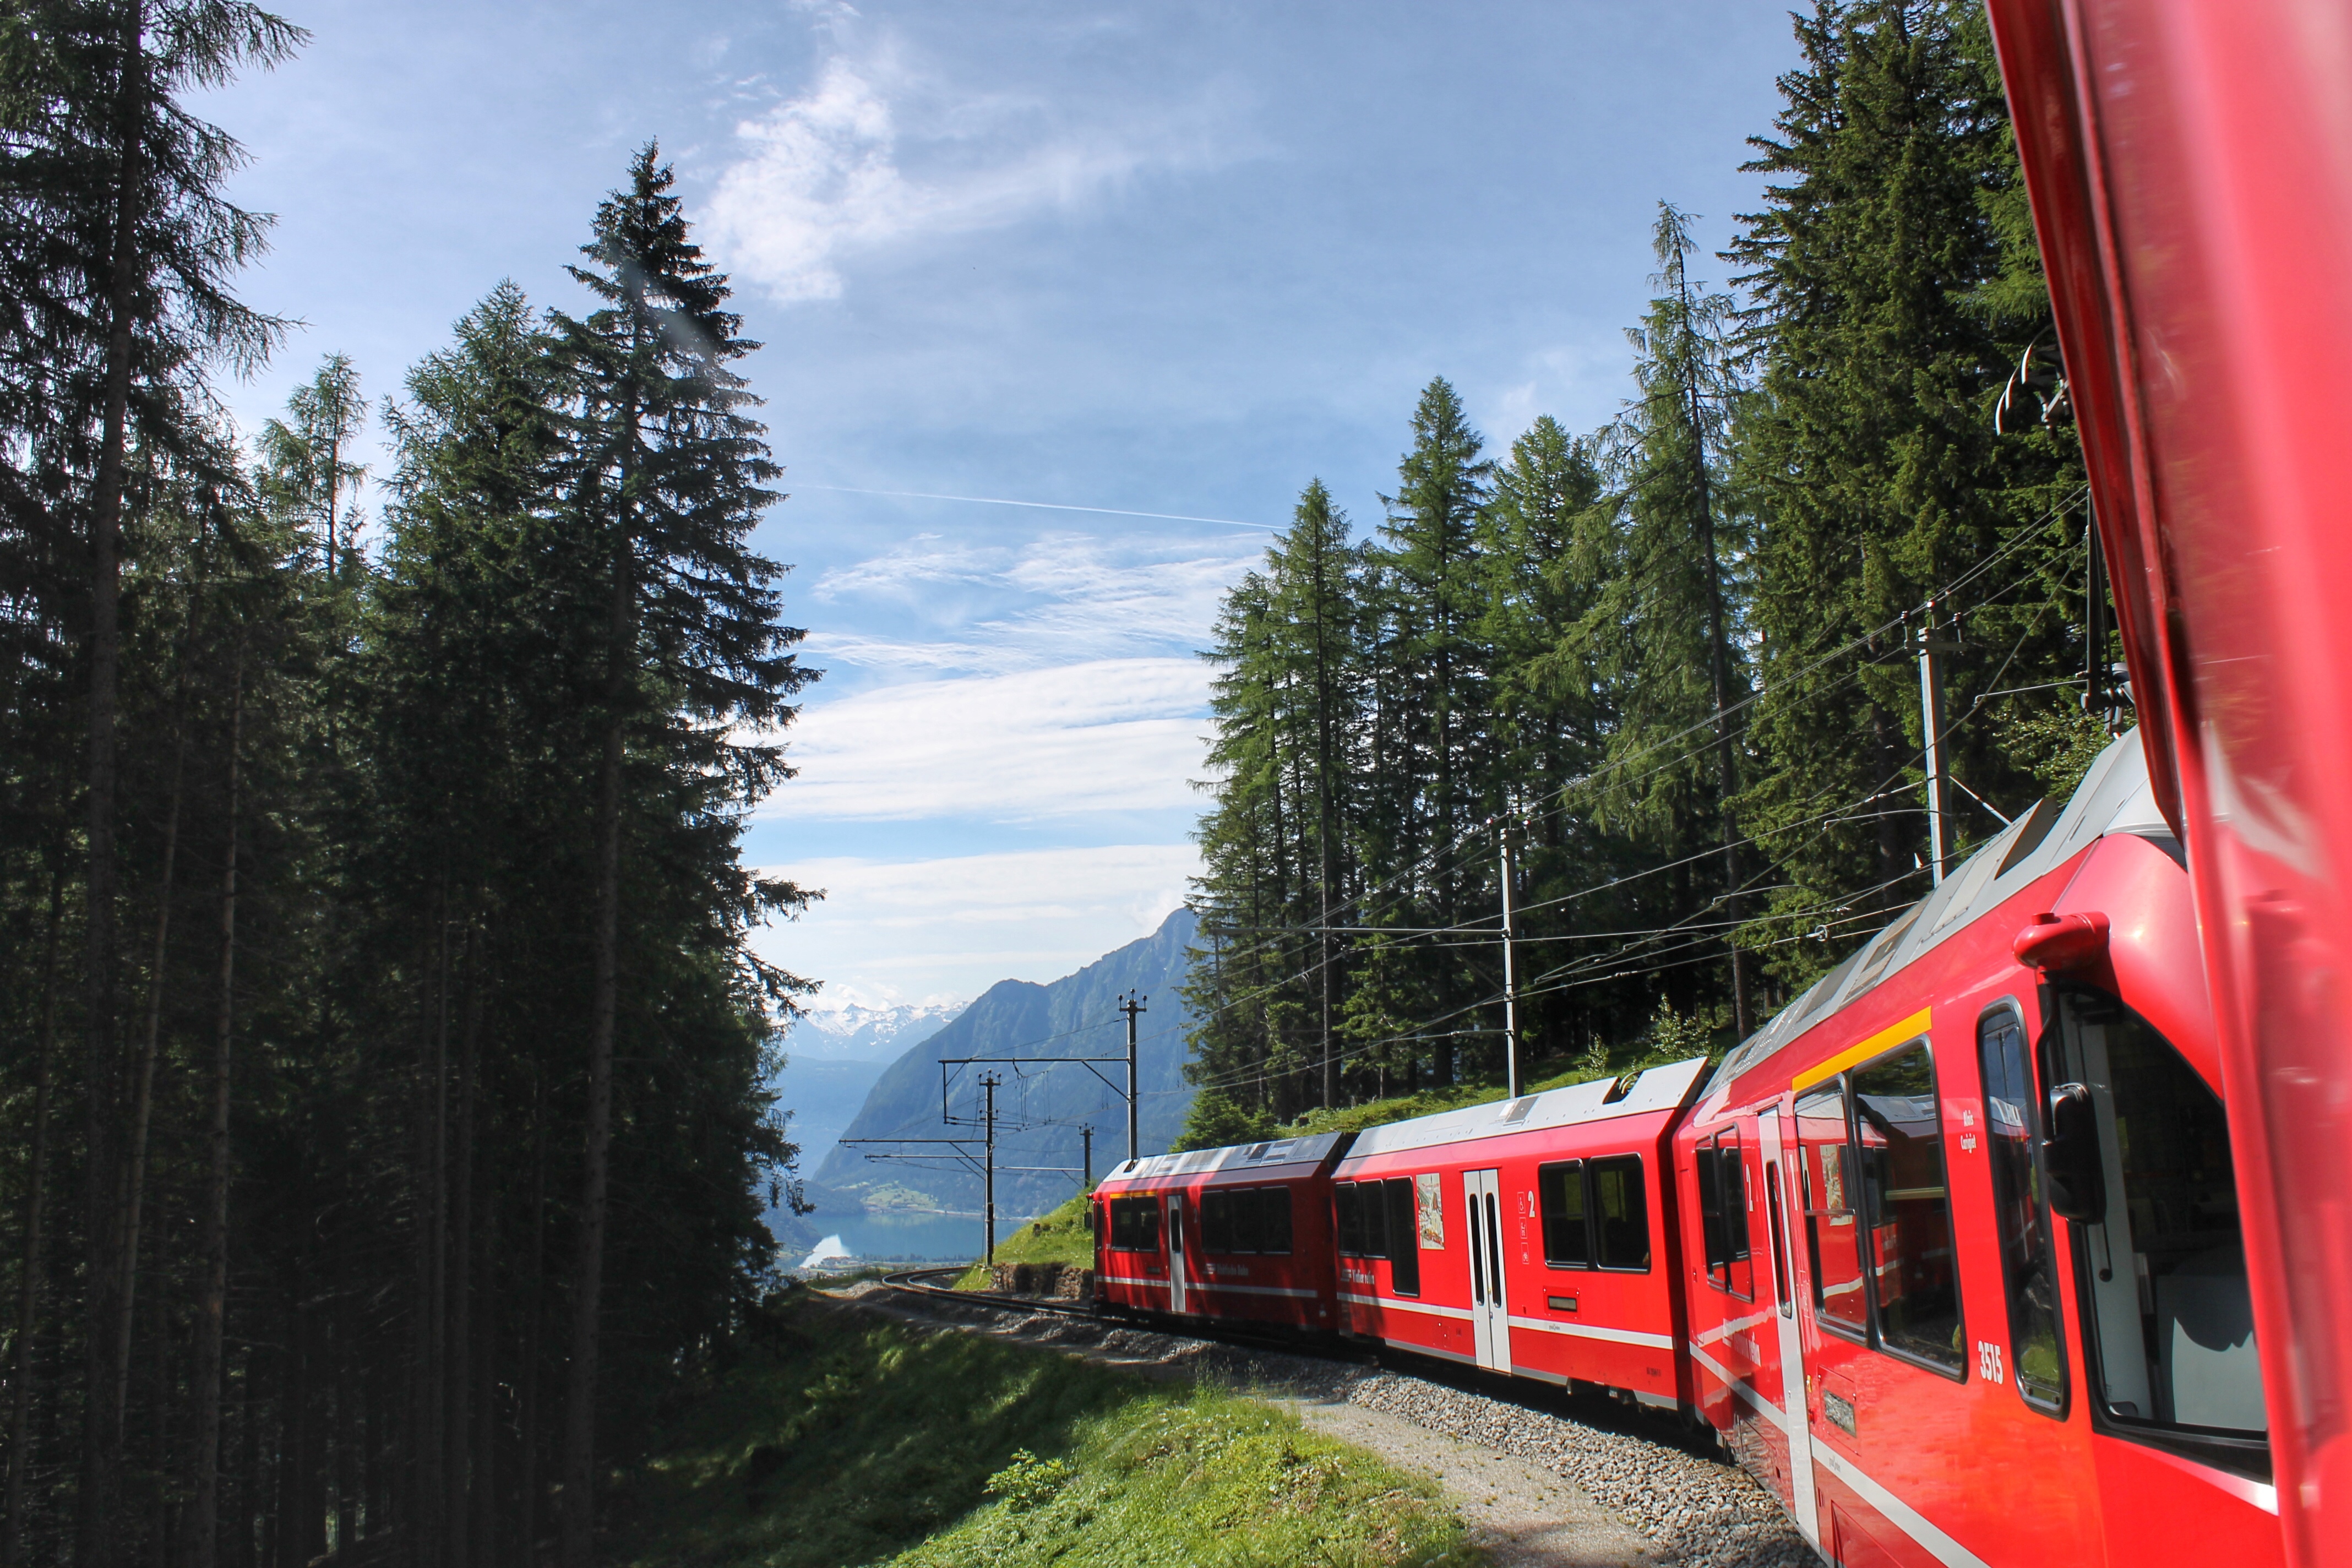 Train Travel in Europe - 7 tips to make your journey more comfortable